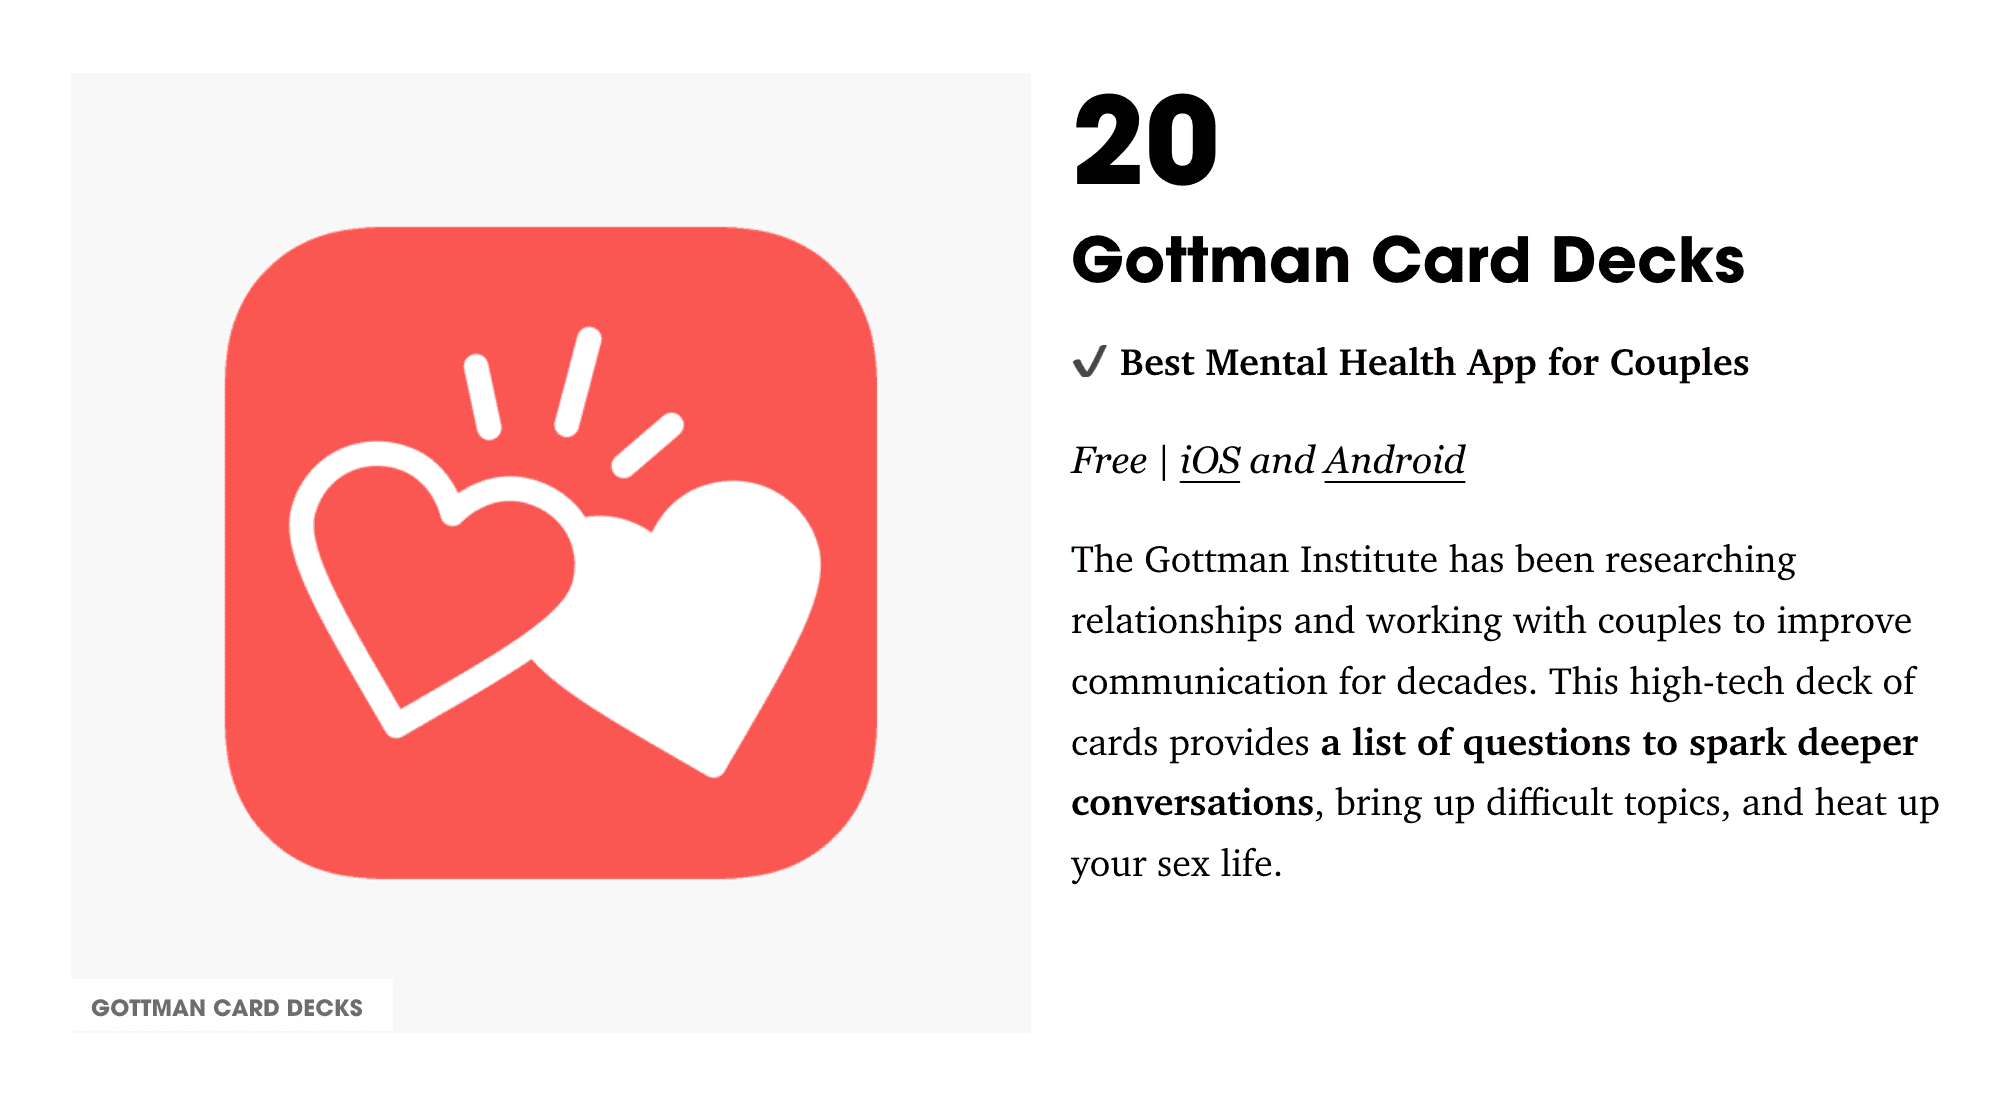 Voted best app for couples by prevention.com